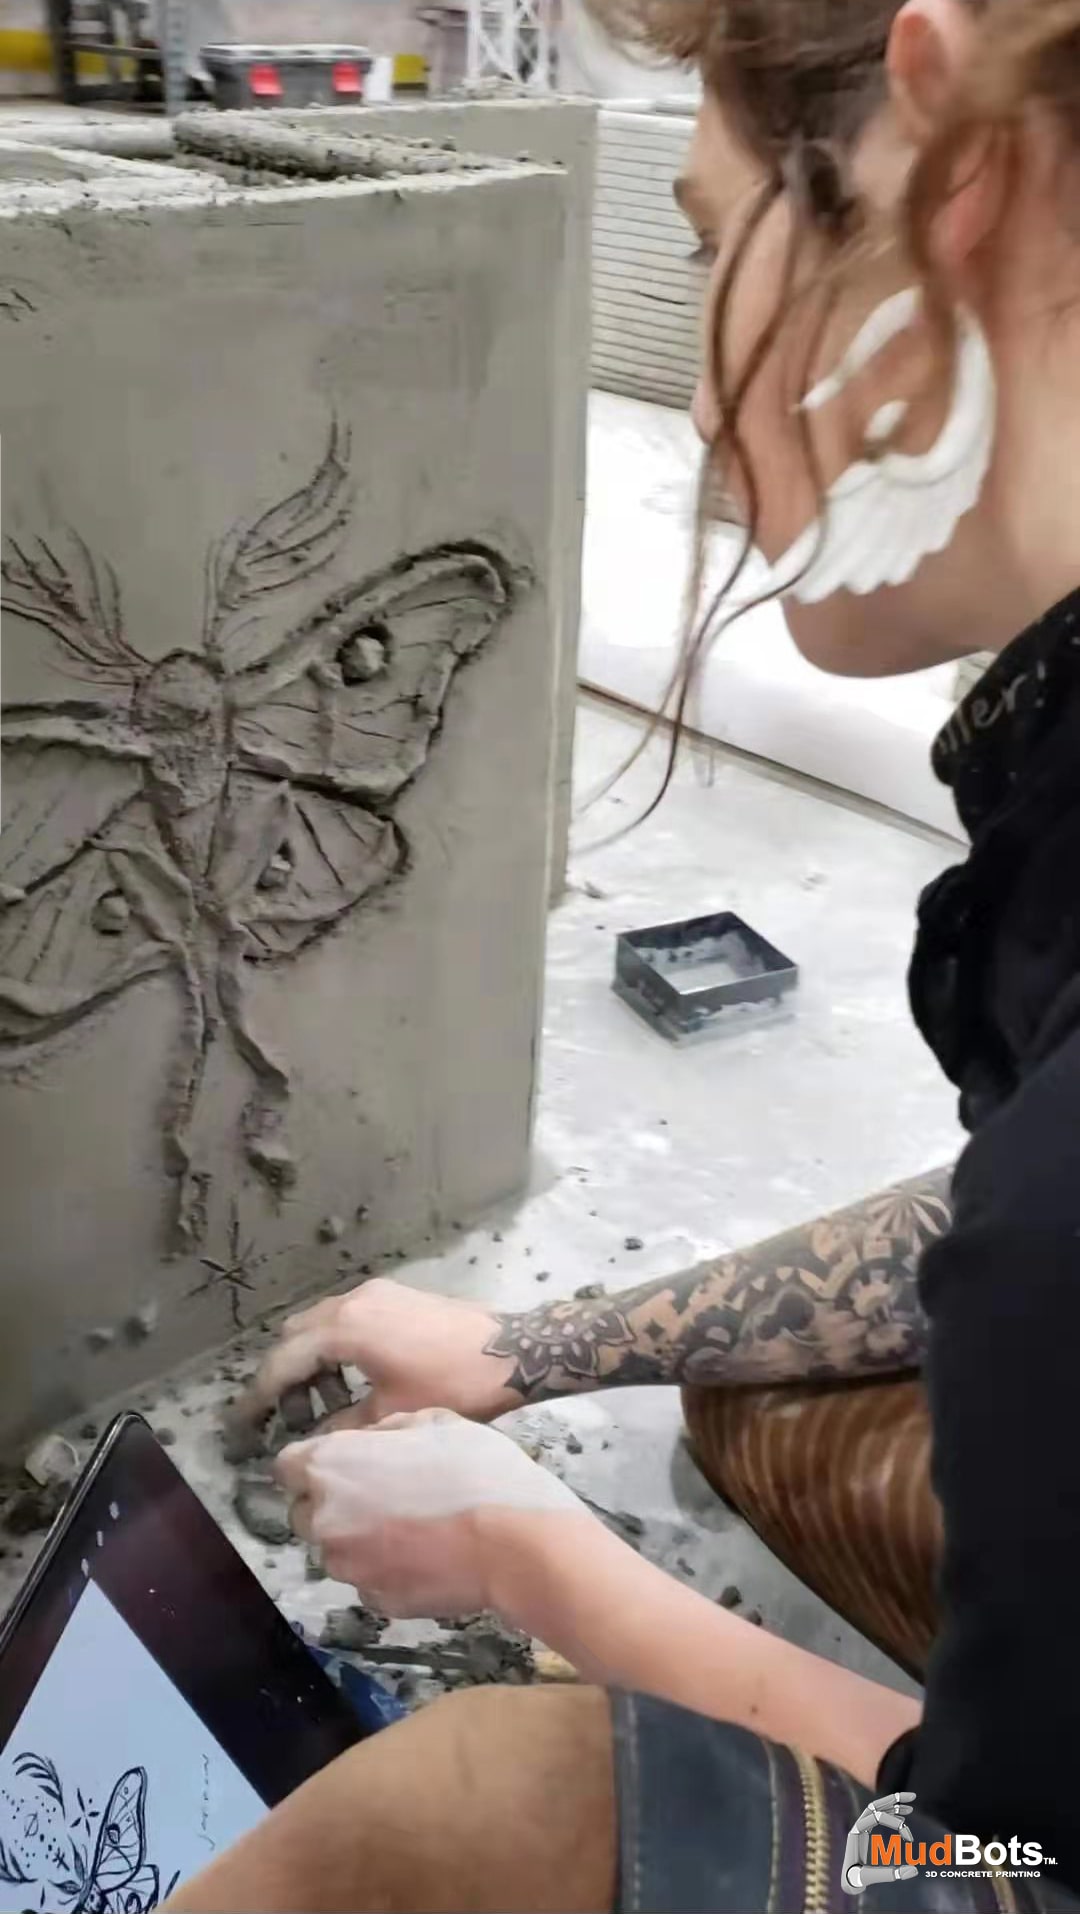 Bring out the ARTIST in you! Design your walls with any vision you have - a beautiful butterfly, in this case. Construction does not have to be all boring and dirty.